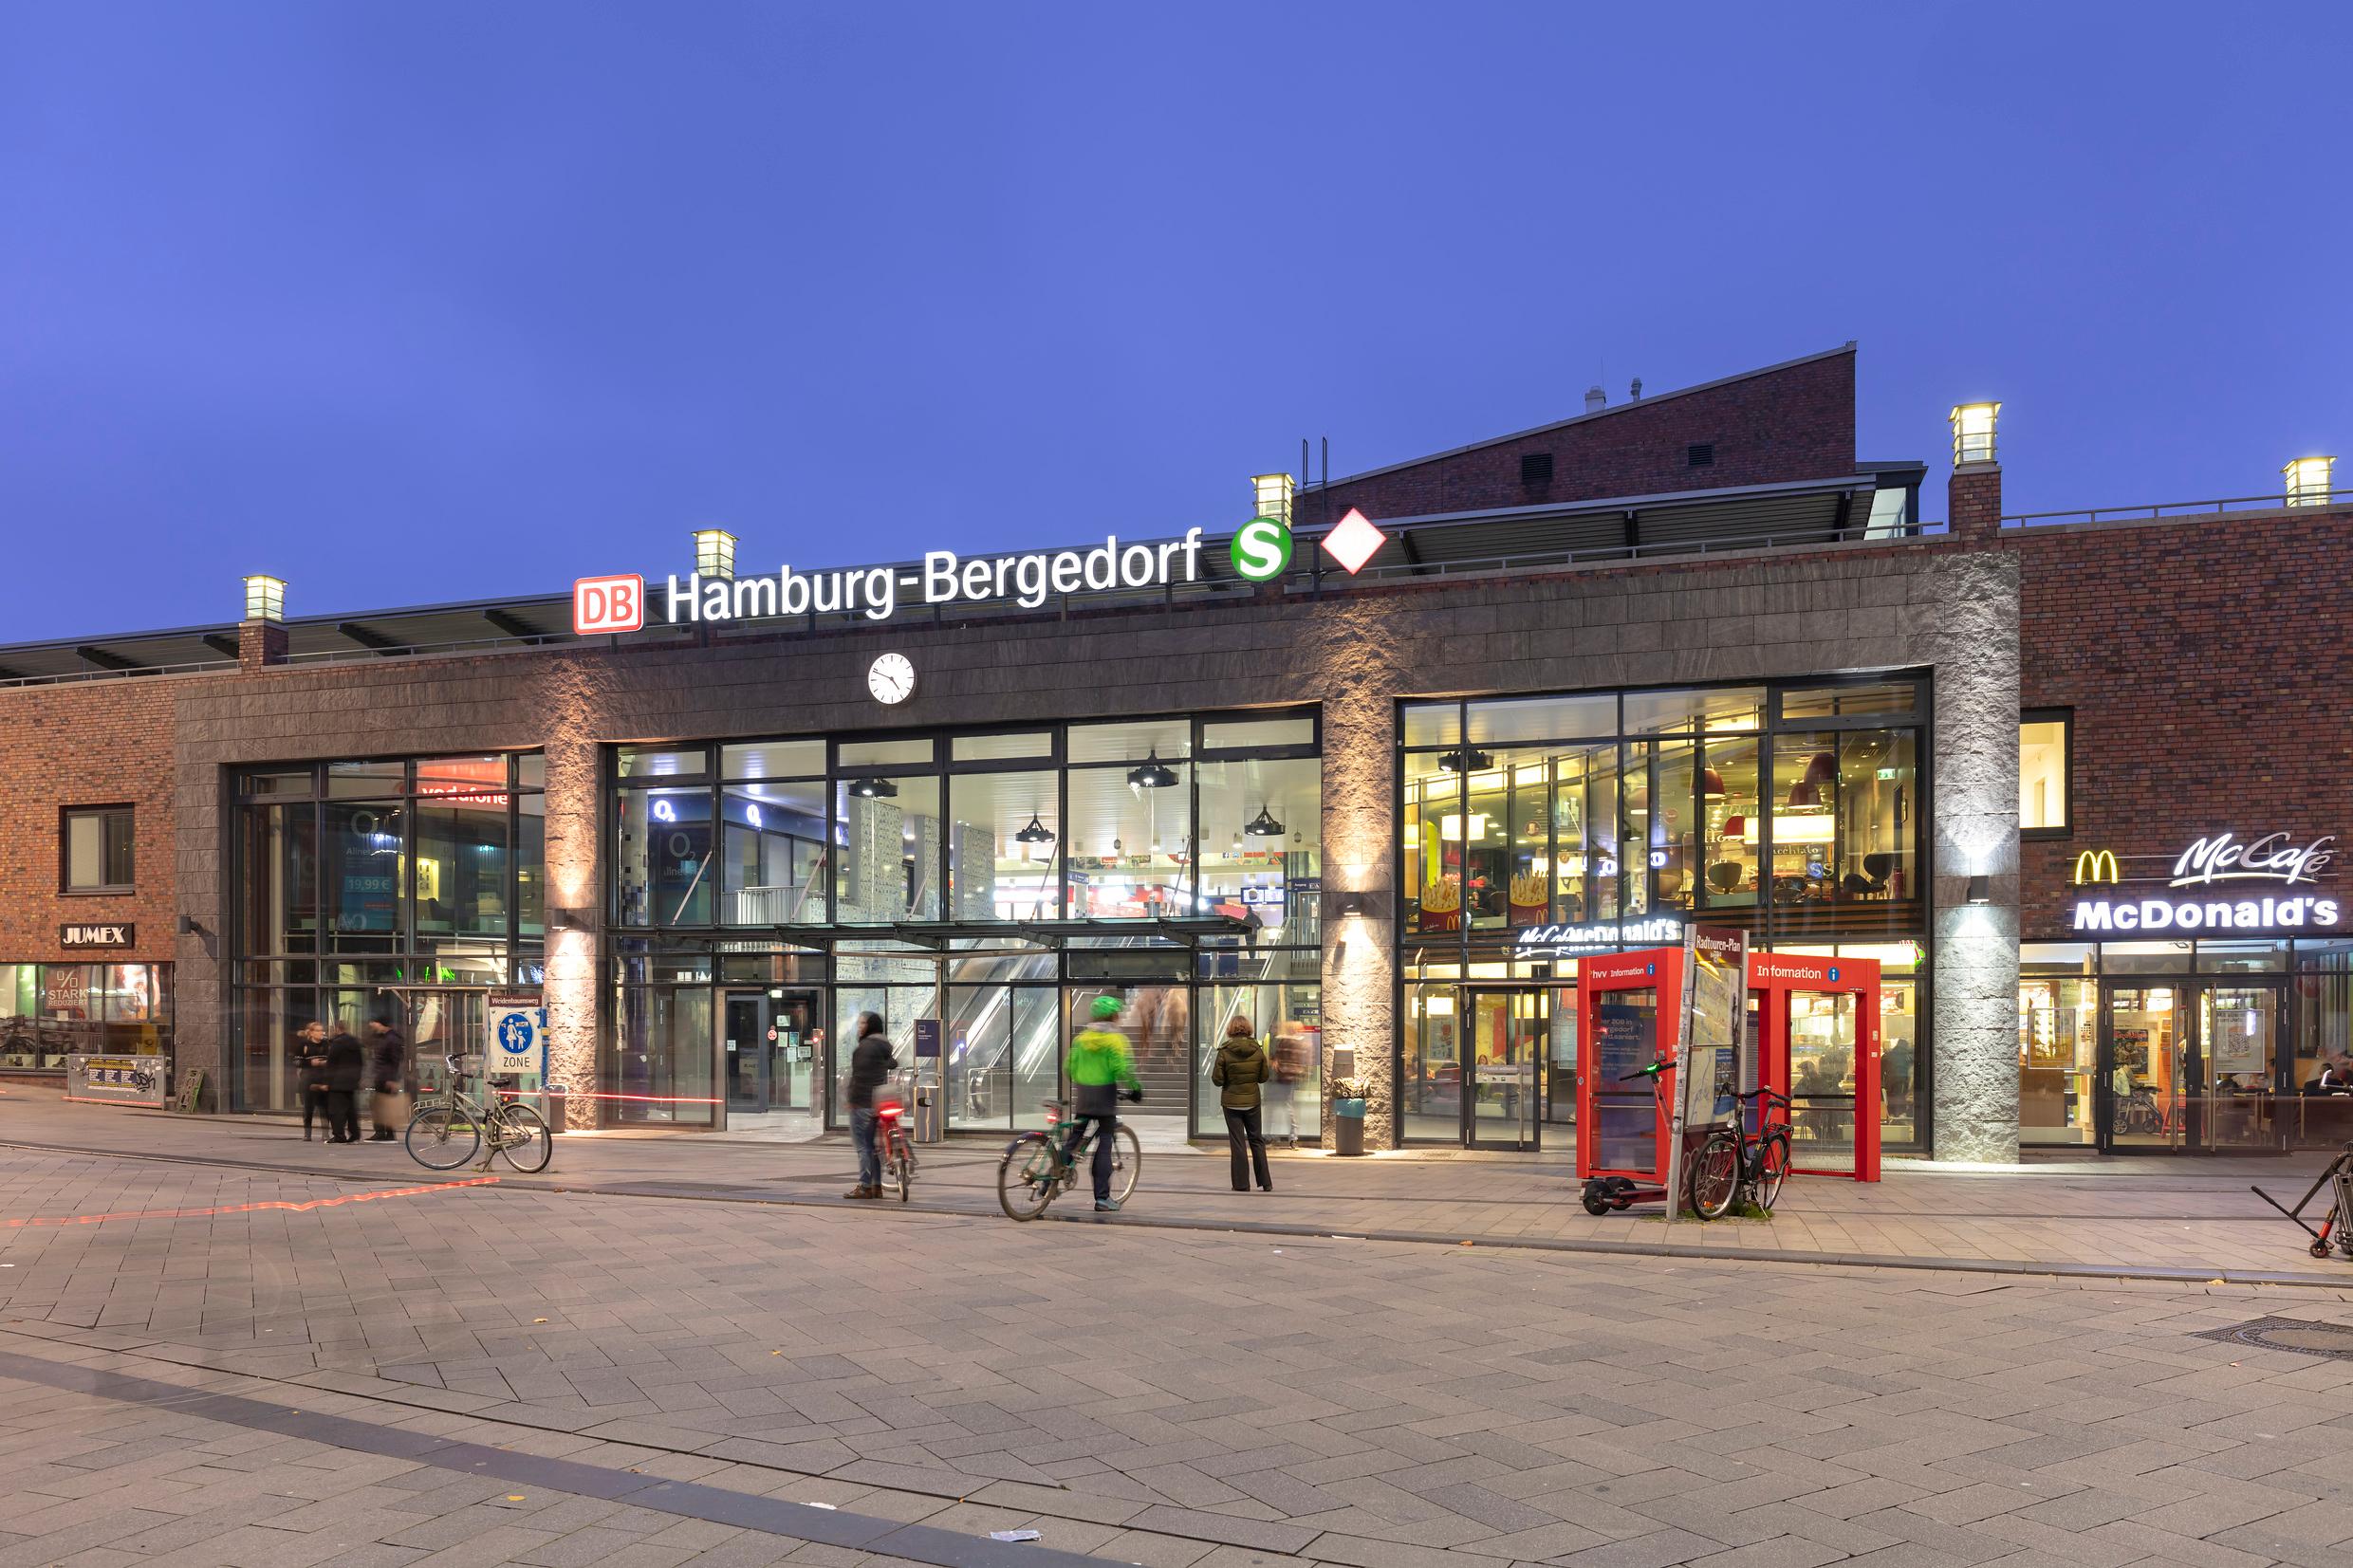 The station building and forecourt of Hamburg-Bergedorf station.